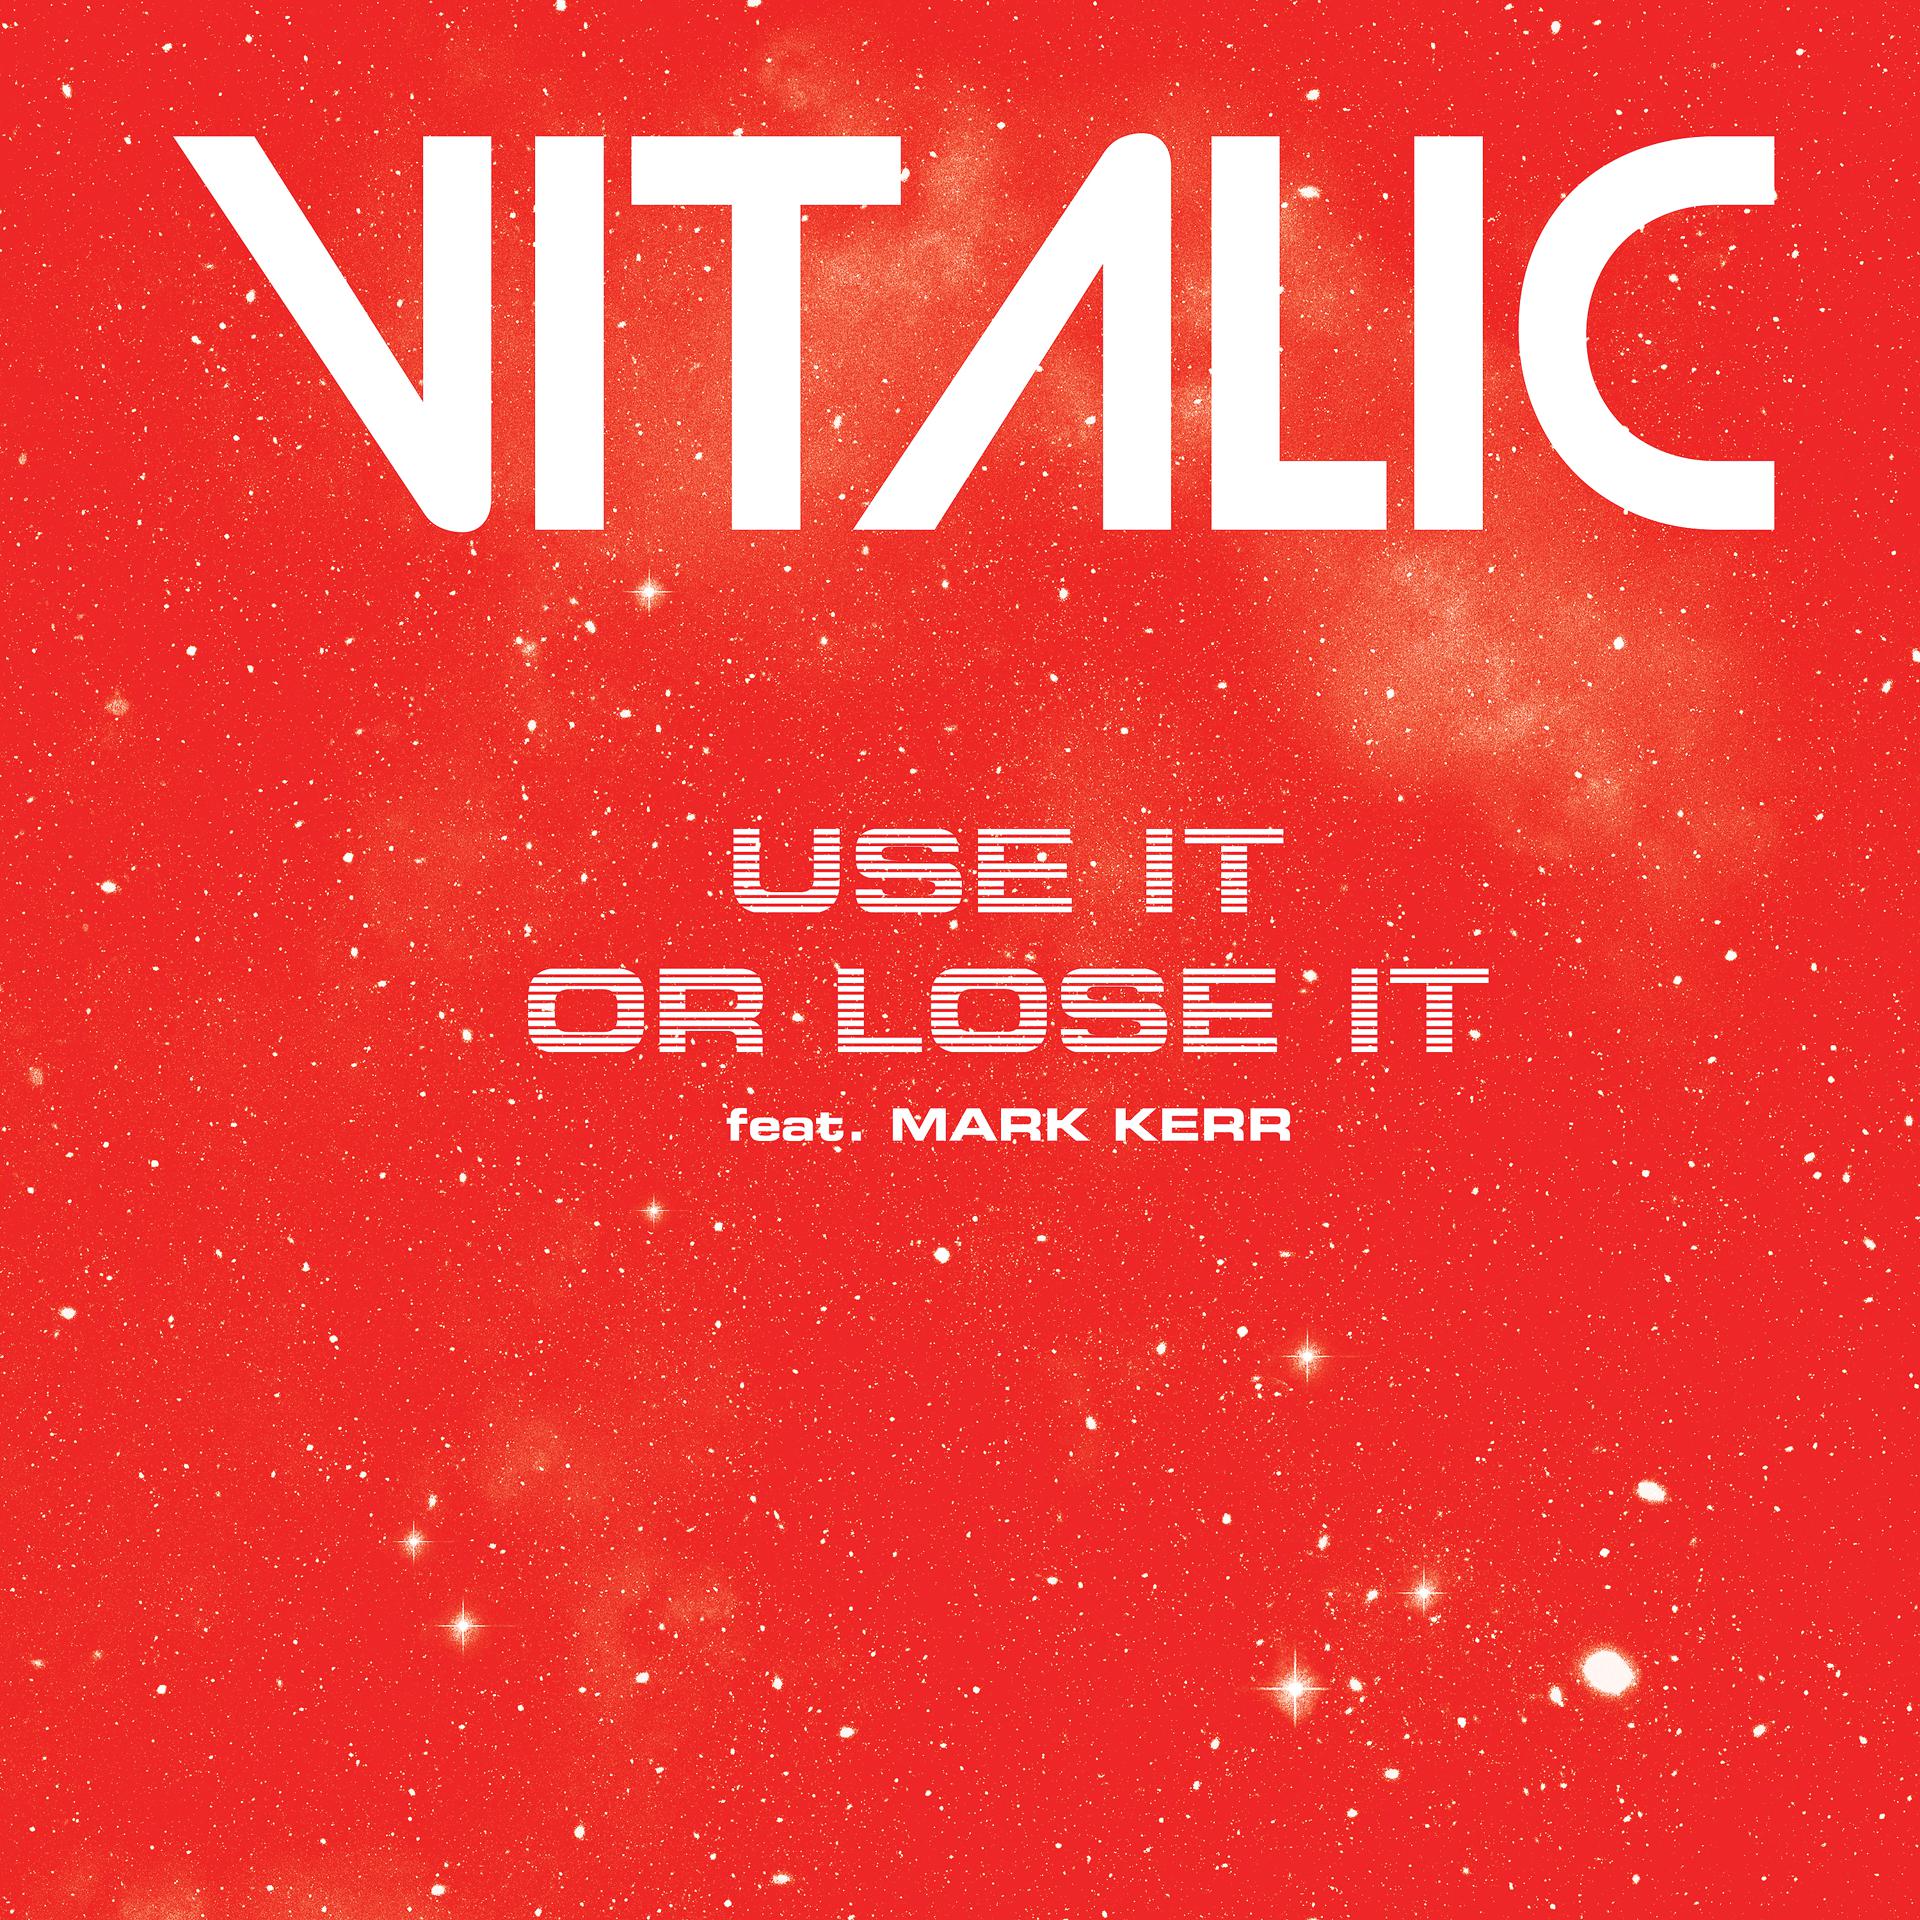 Lose marks. Feat марка. Use it or lose it. Vitalic. Use or lose.